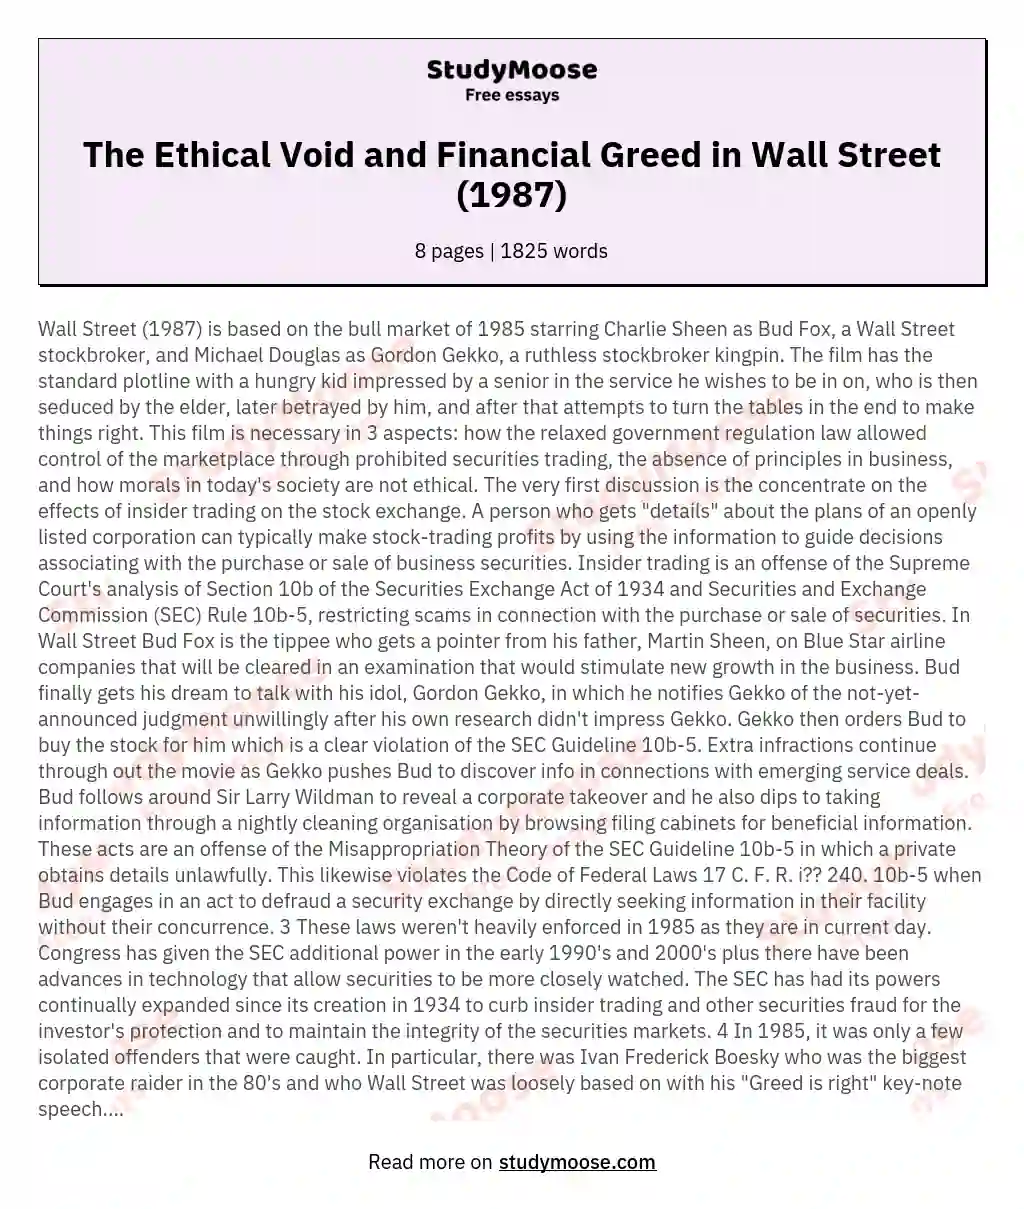 The Ethical Void and Financial Greed in Wall Street (1987) essay